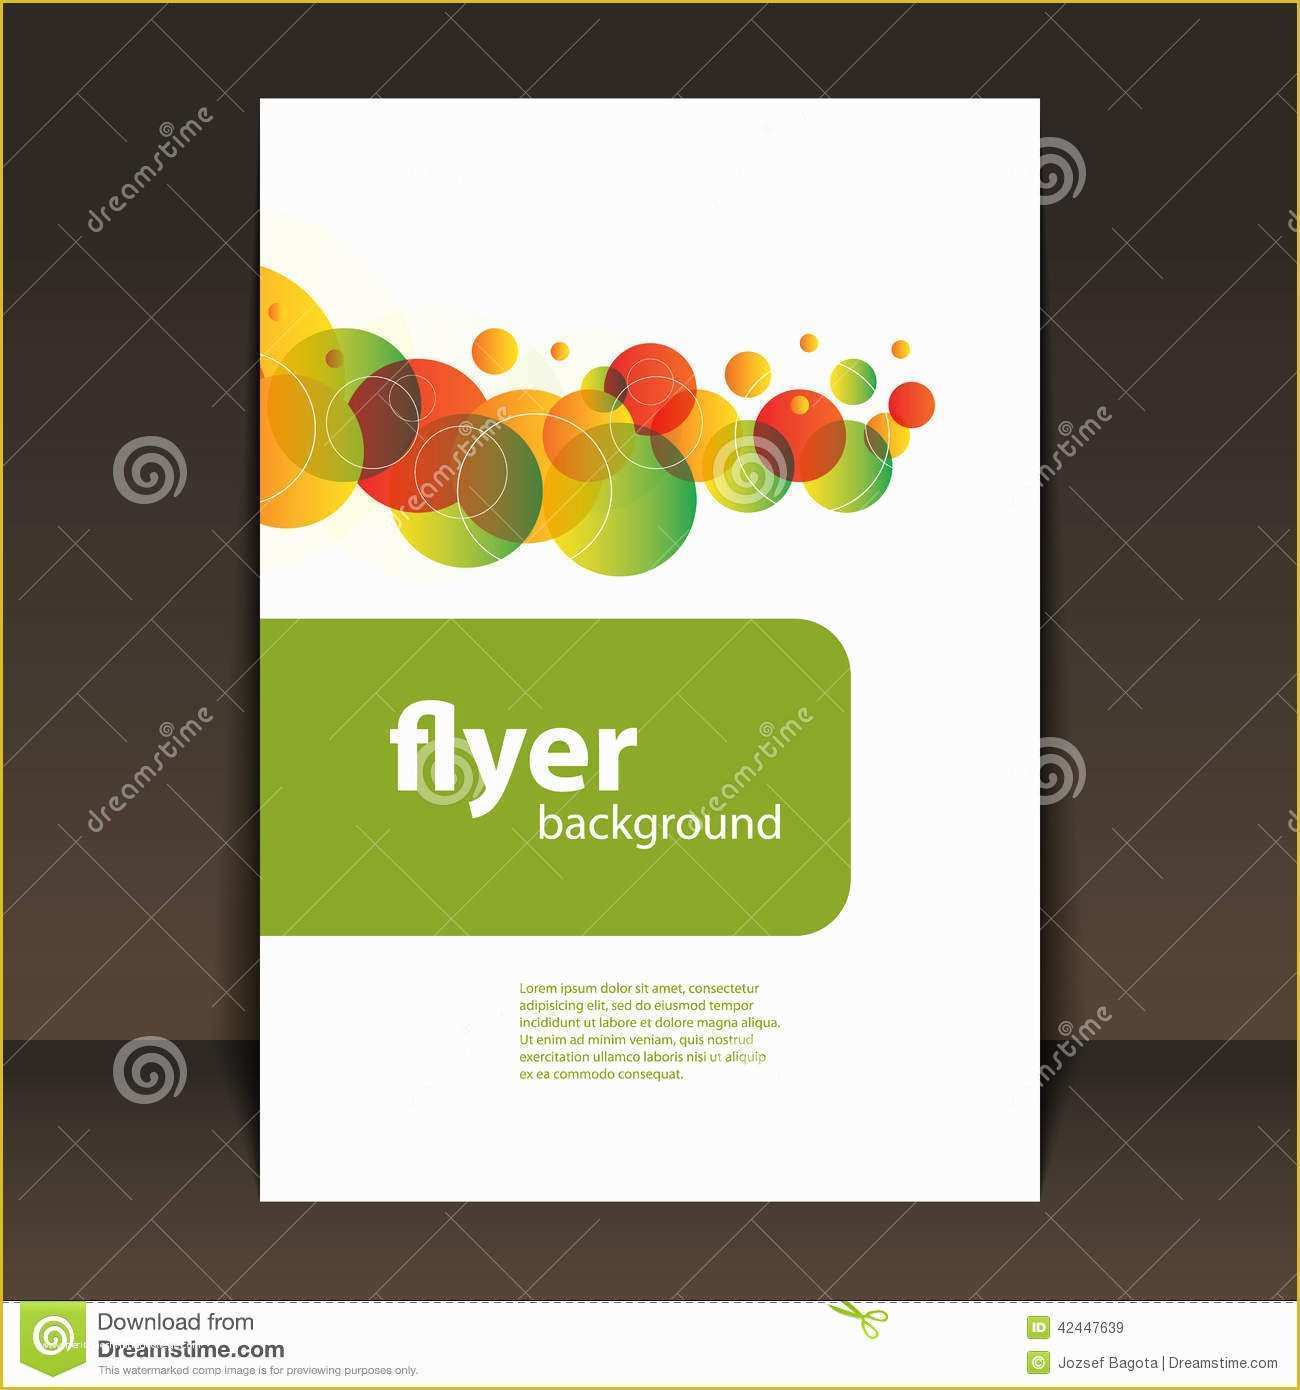 Book Cover Design Template Free Download Of Flyer Cover Design Circles Pattern Background Stock